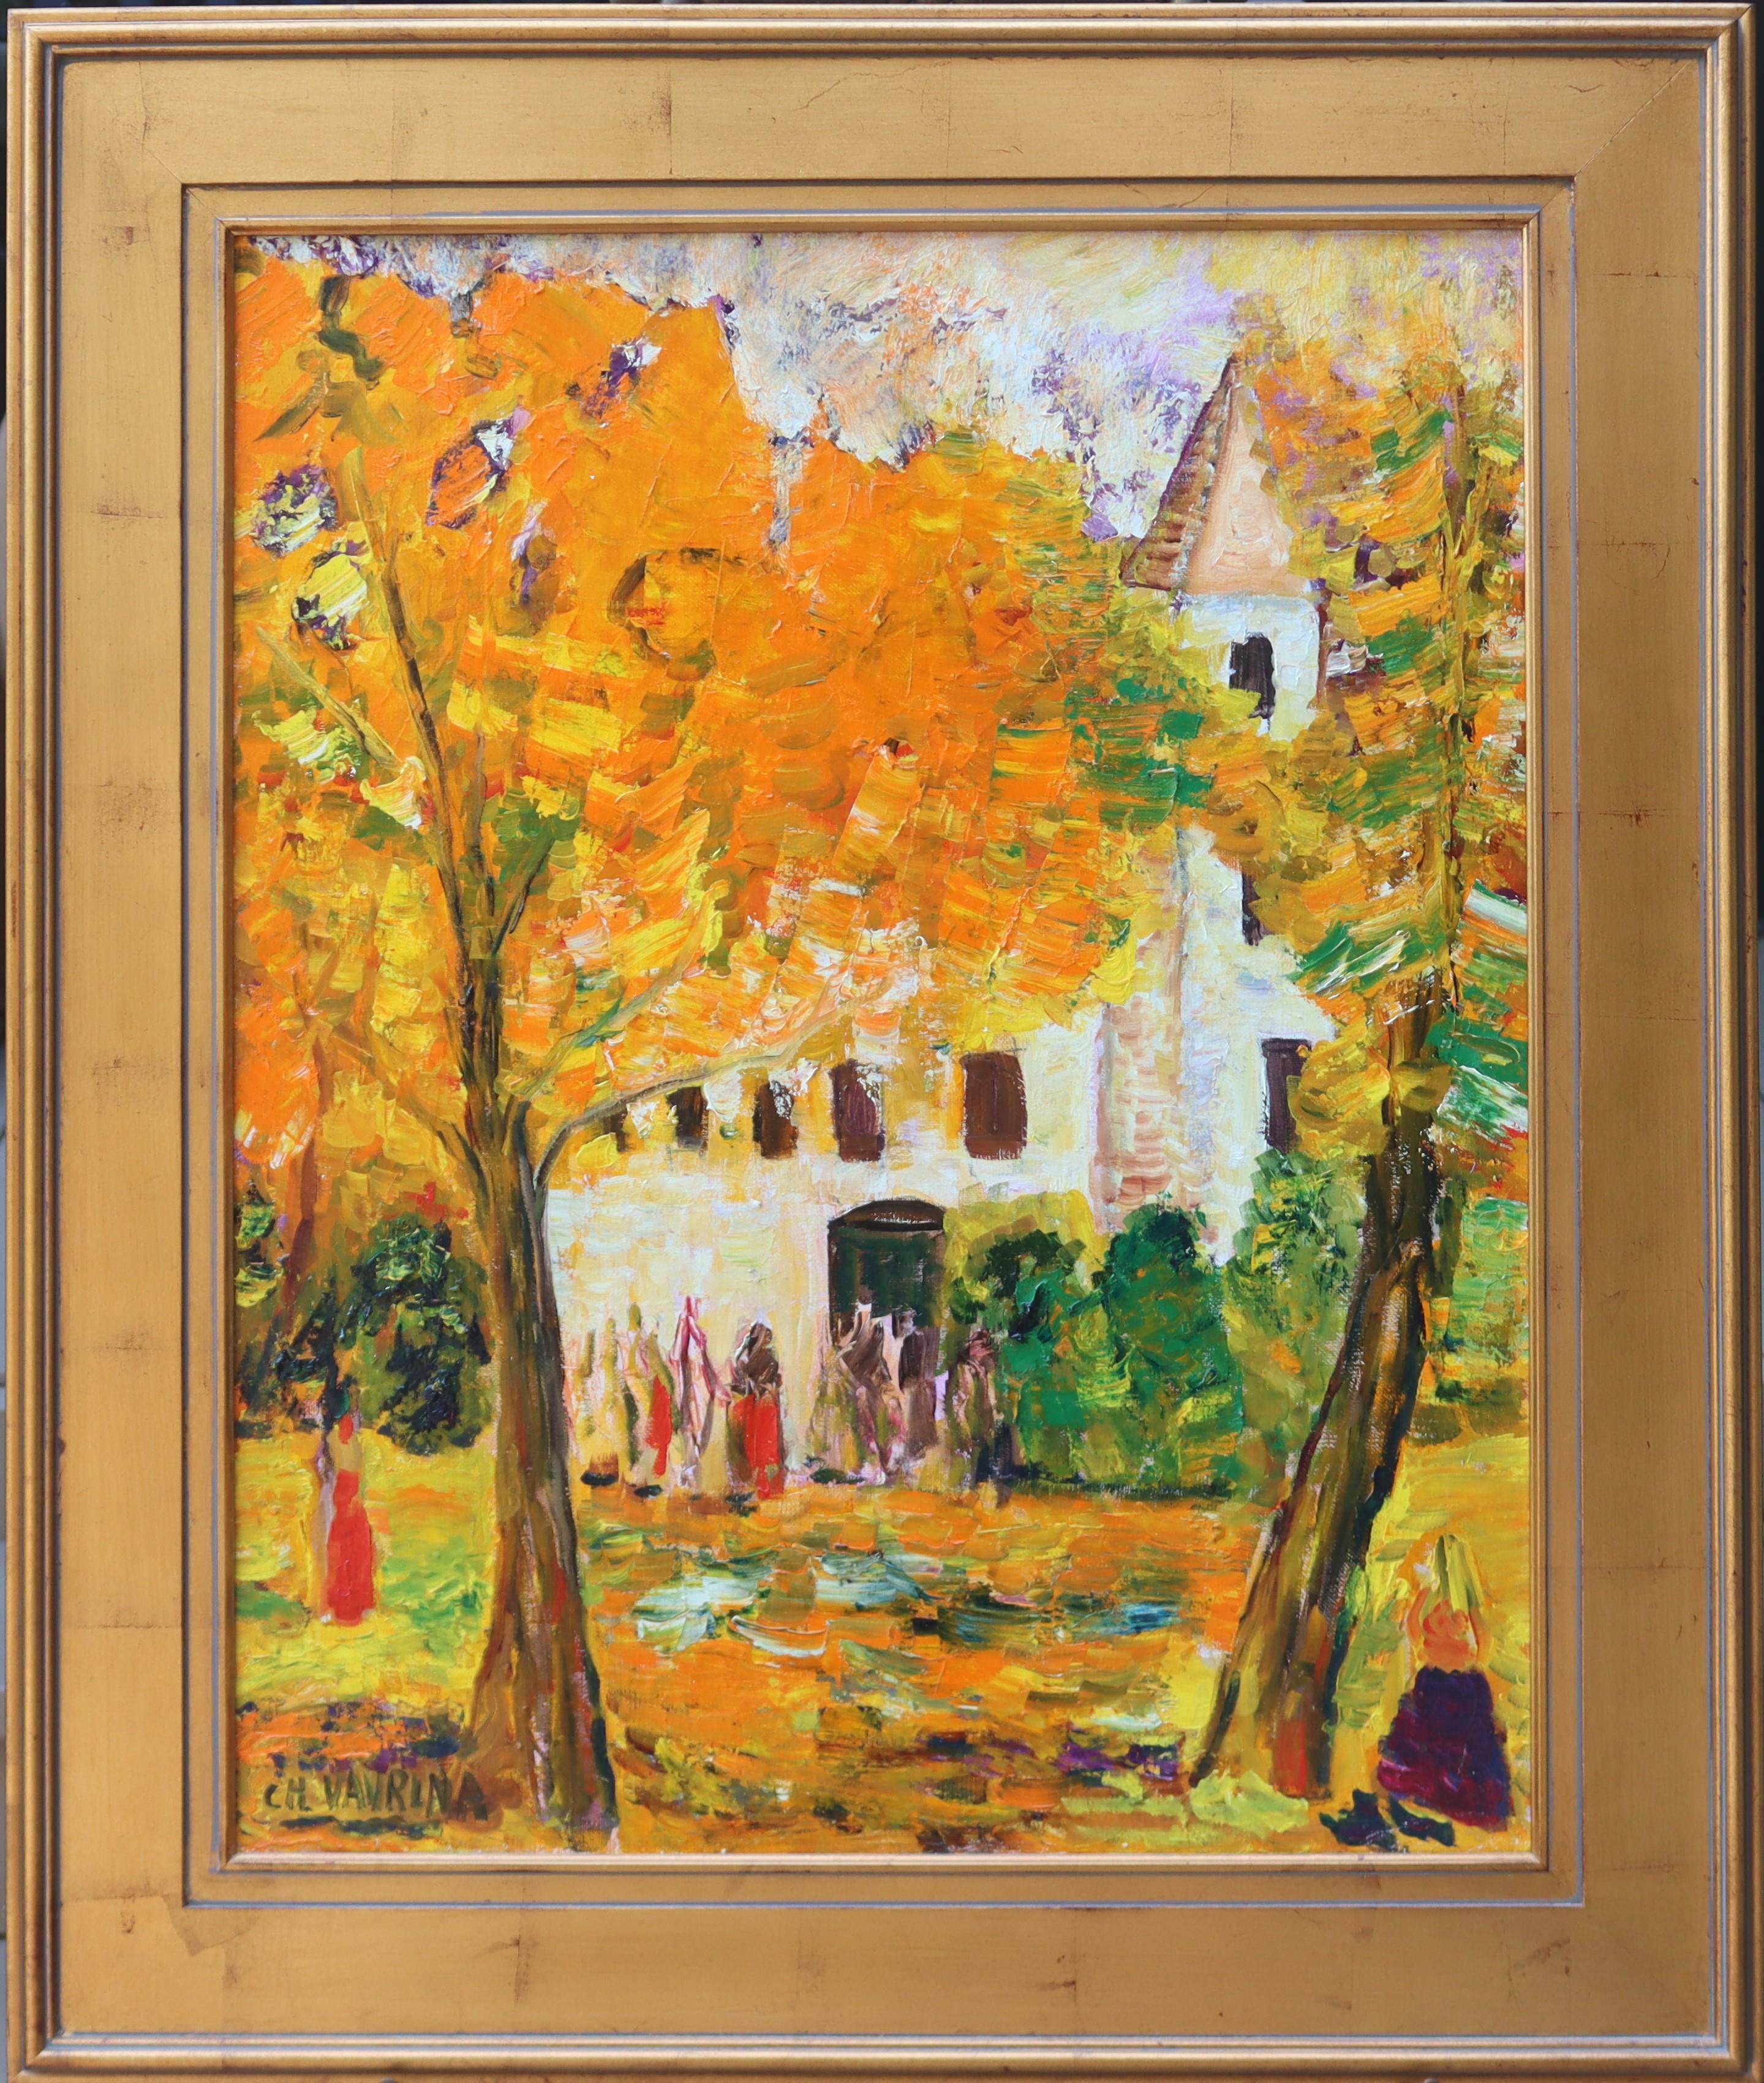 Church In The Dell - Painting by Charles Vavrina